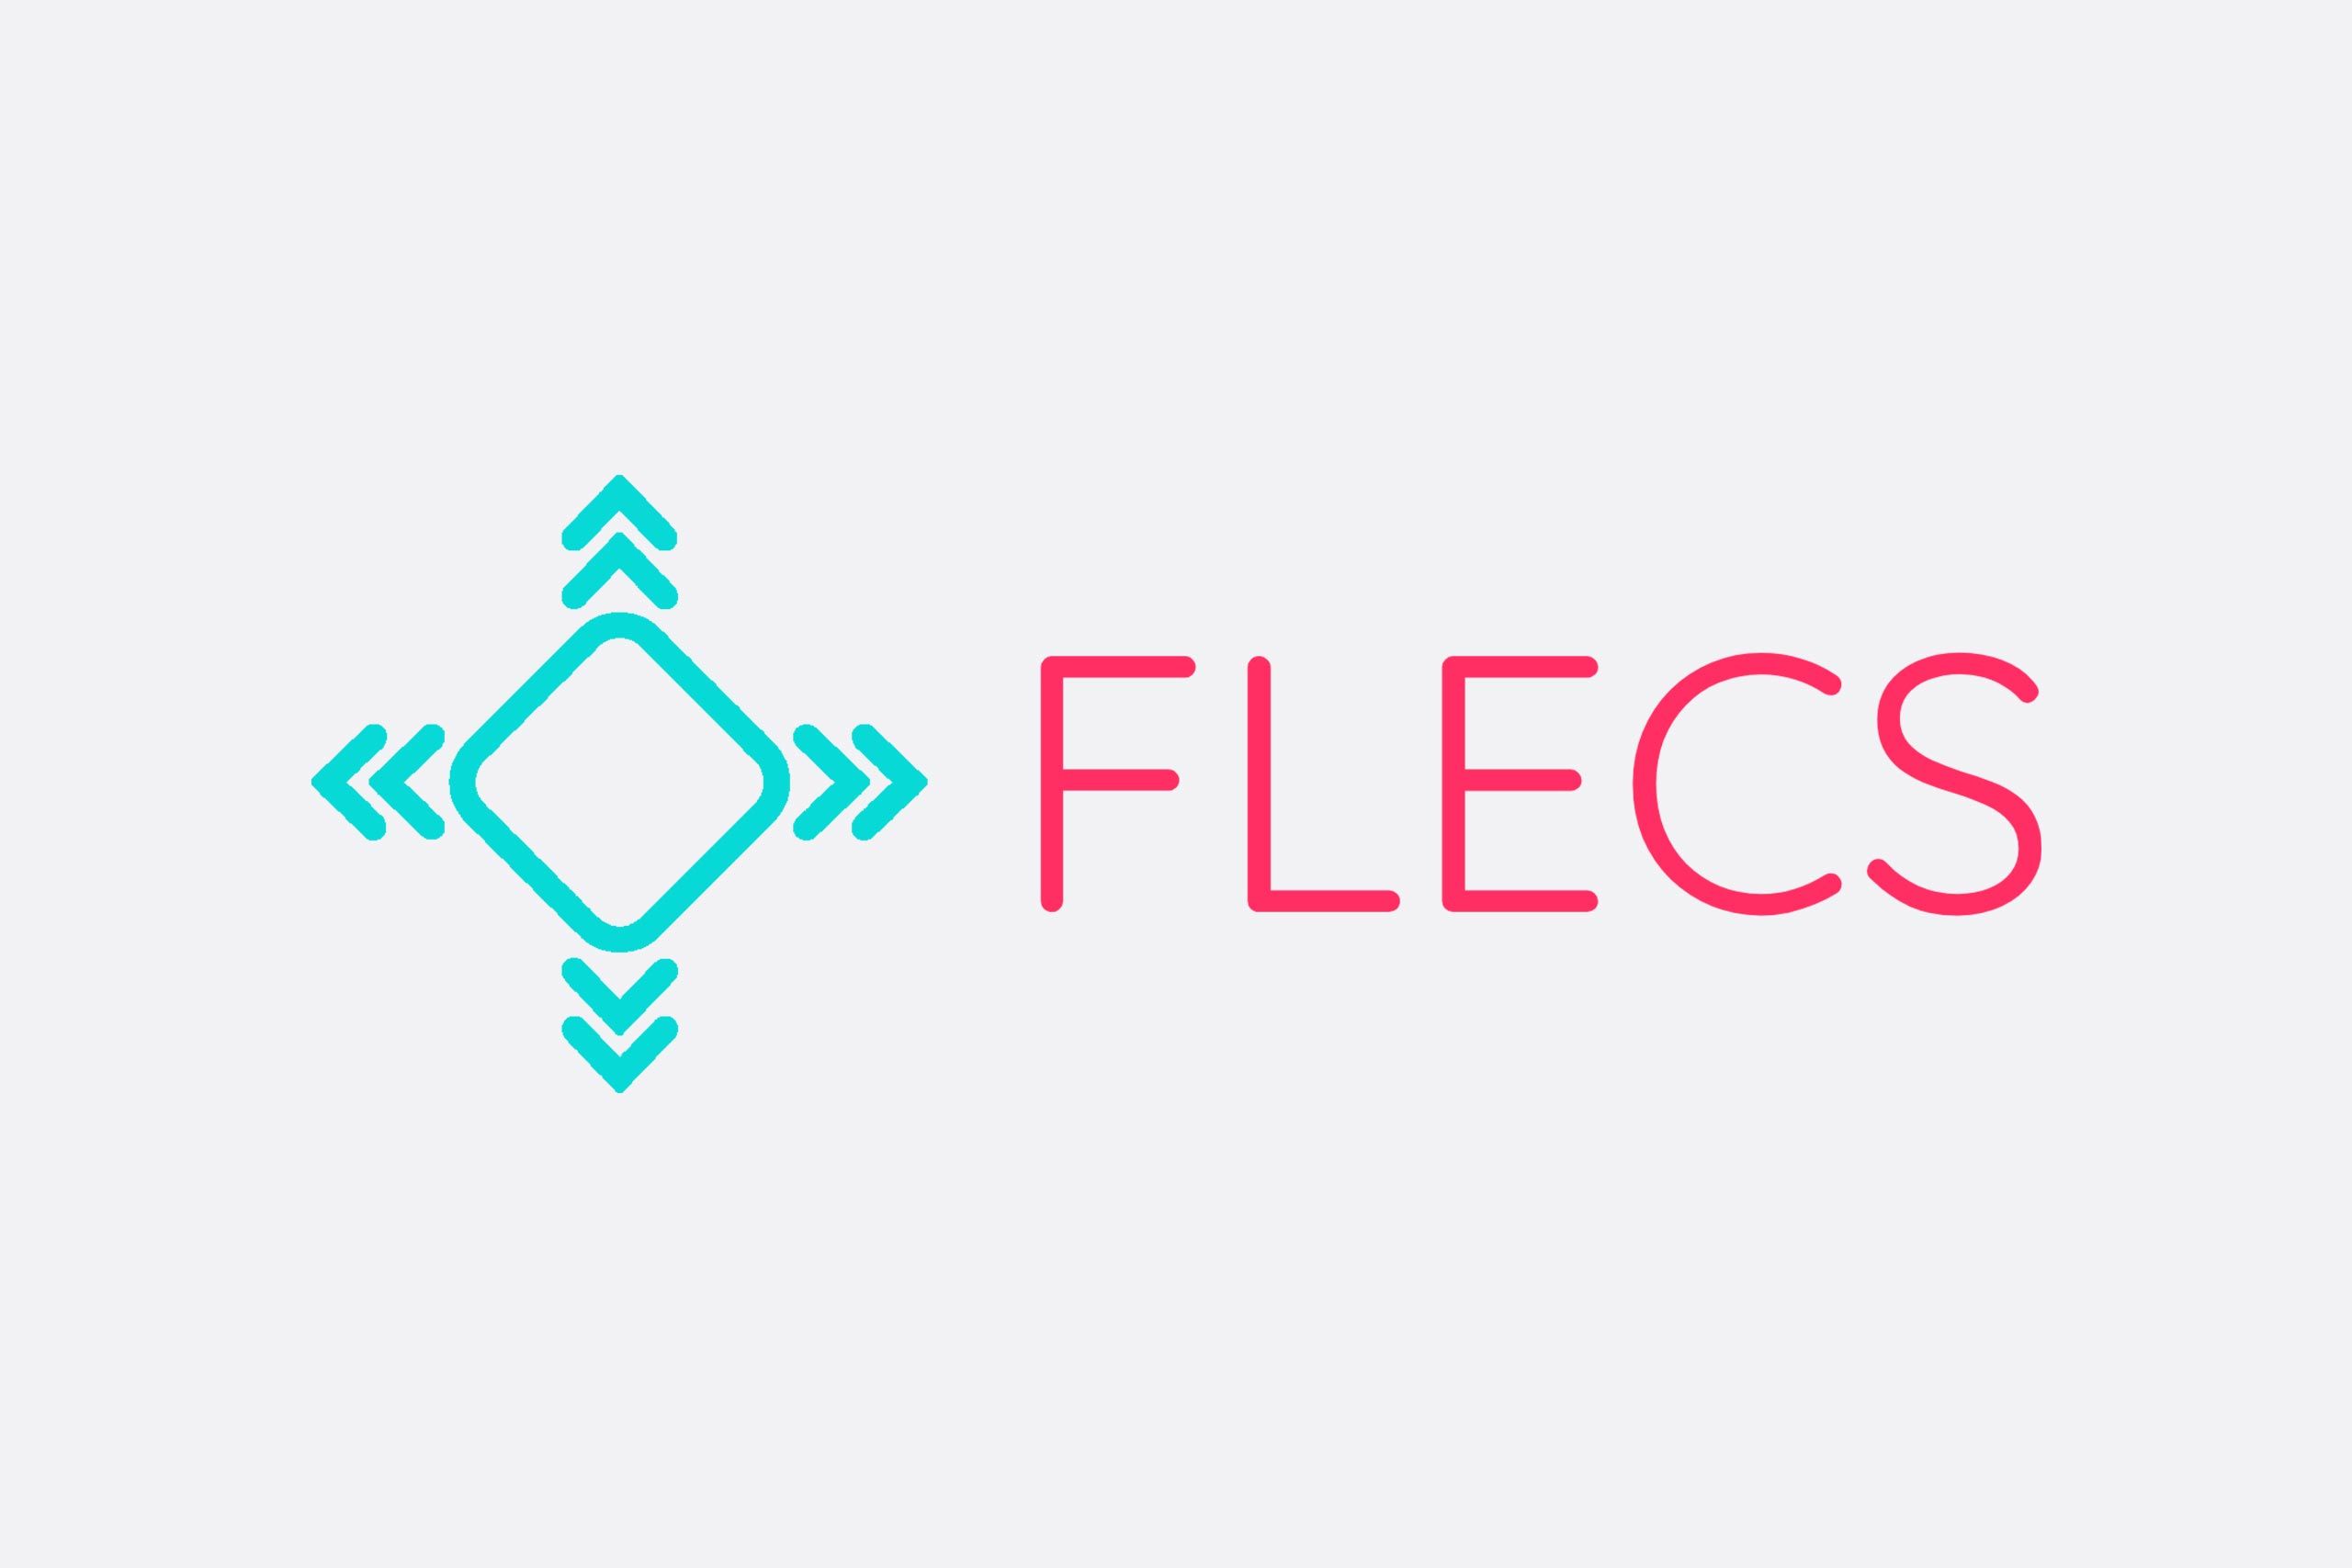 The logo in green and red of Flecs Software is shown 